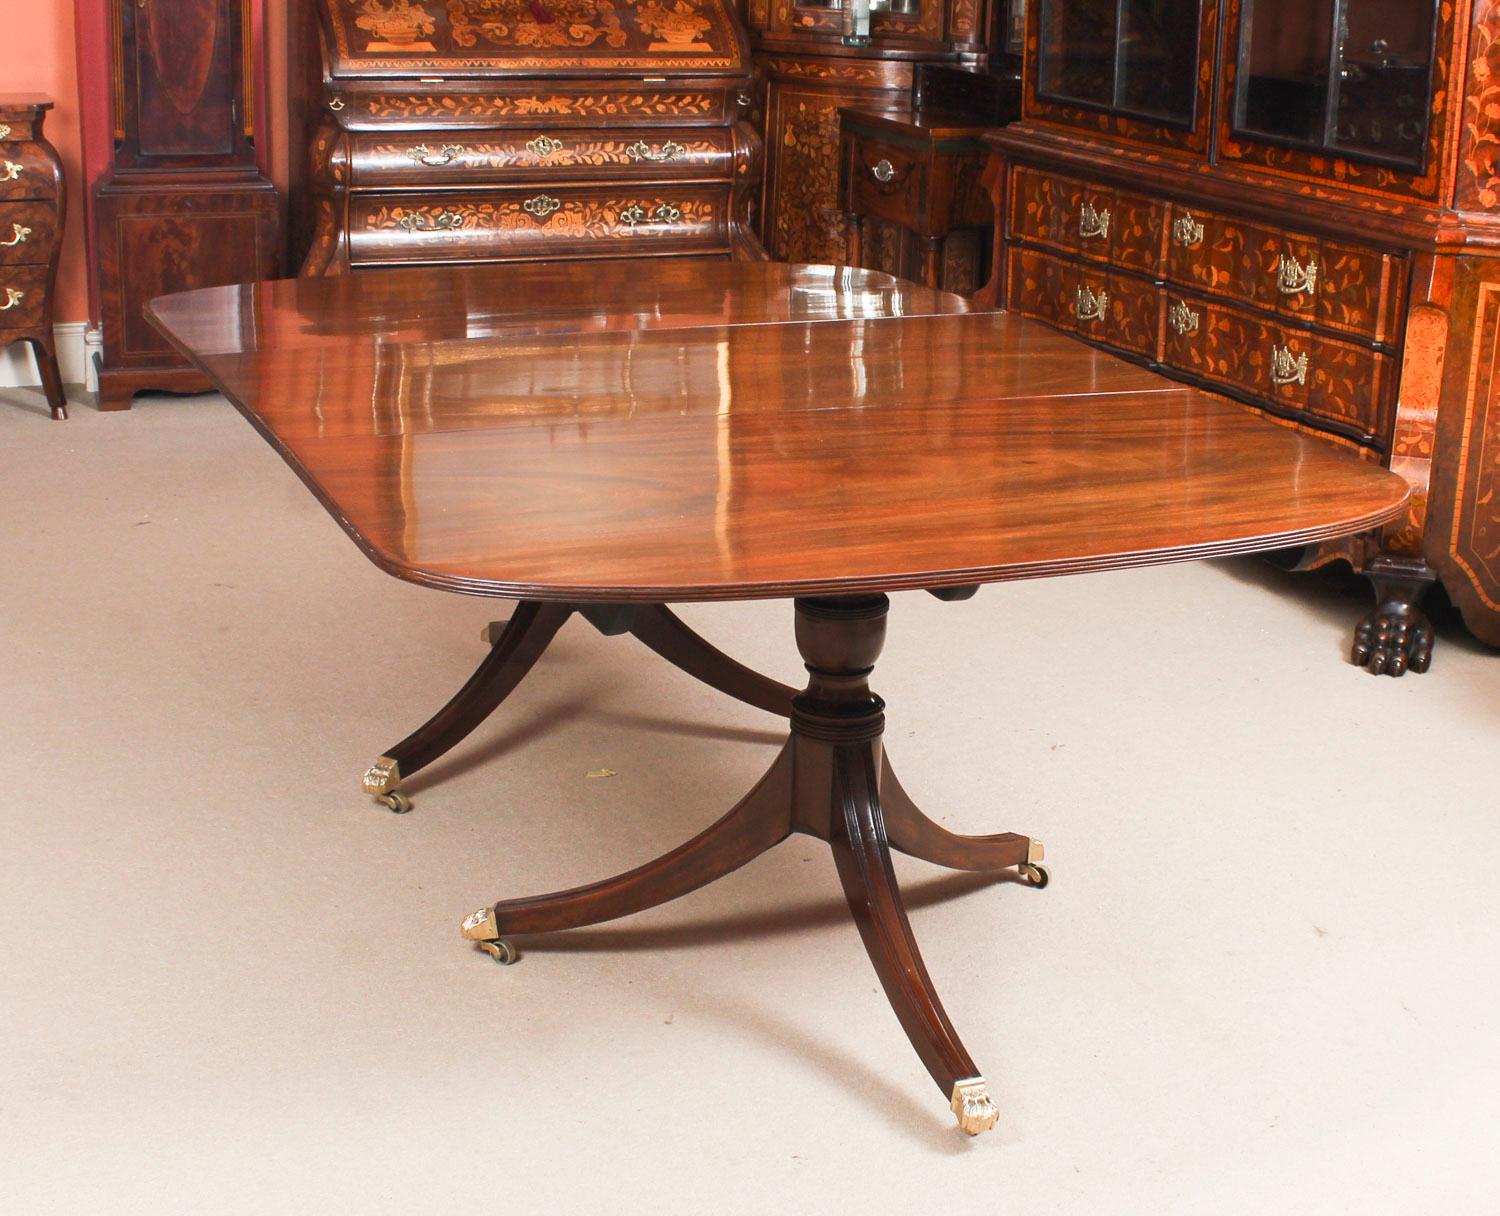 George III Regency Dining Table 19th Century with 8 Bespoke Dining Chairs 6